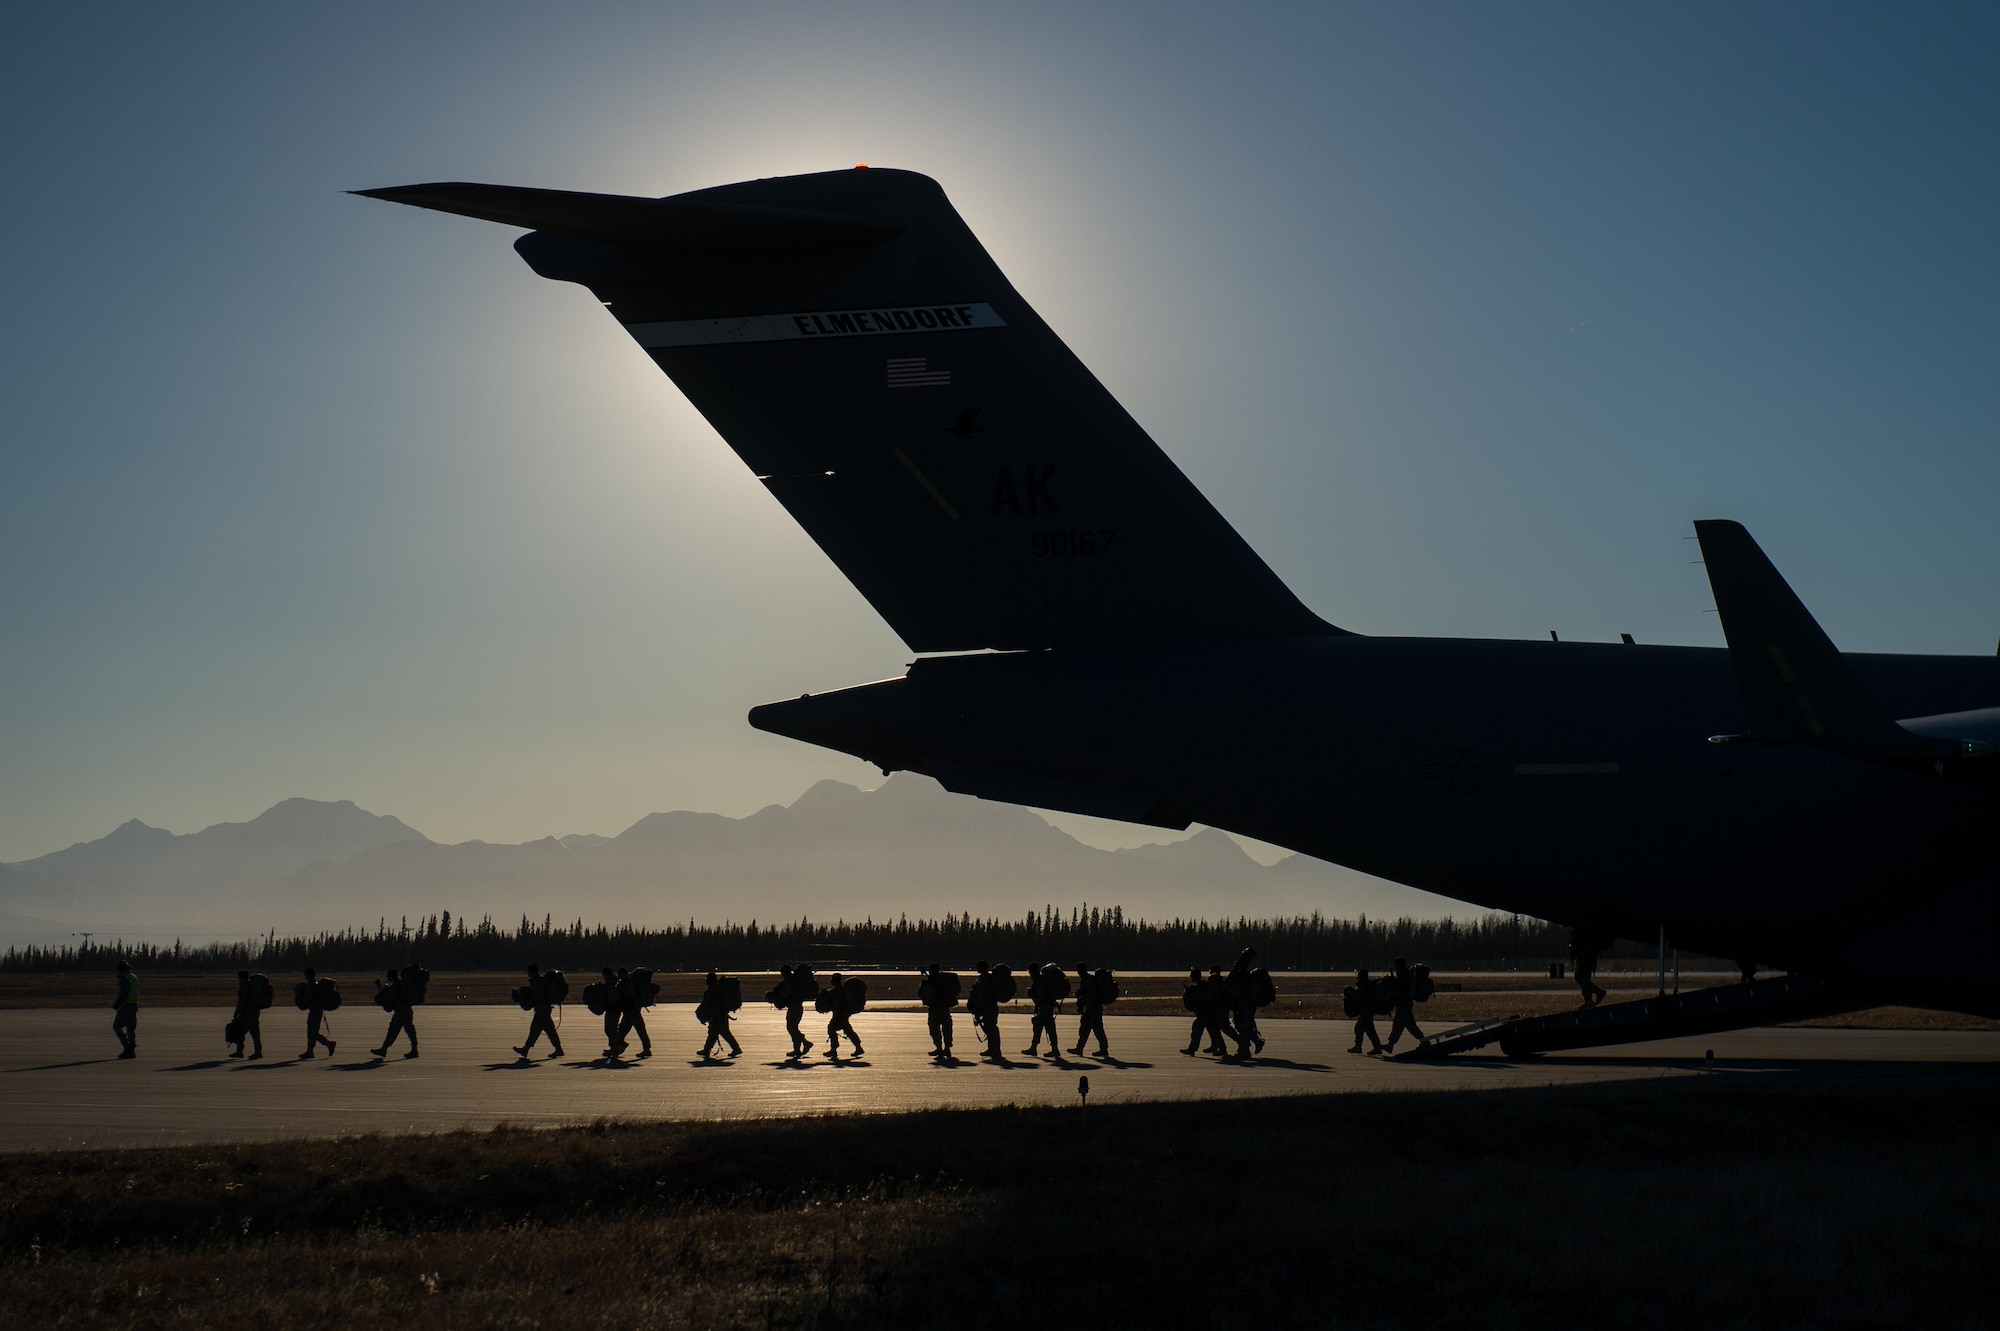 U.S. Airmen assigned to the 621st Contingency Response Wing guide Soldiers with the 4th Brigade Combat Team (Airborne), 25th Infantry Division as they exit a C-17 Globemaster III aircraft during exercise RED FLAG-Alaska 17-1, Oct. 13, 2016. RF-A is a series of Pacific Air Forces commander-directed field training exercises for U.S. and partner nation forces, providing combined offensive counter-air, interdiction, close air support, and large force employment training in a simulated combat environment. (U.S. Air Force photo by Master Sgt. Joseph Swafford)